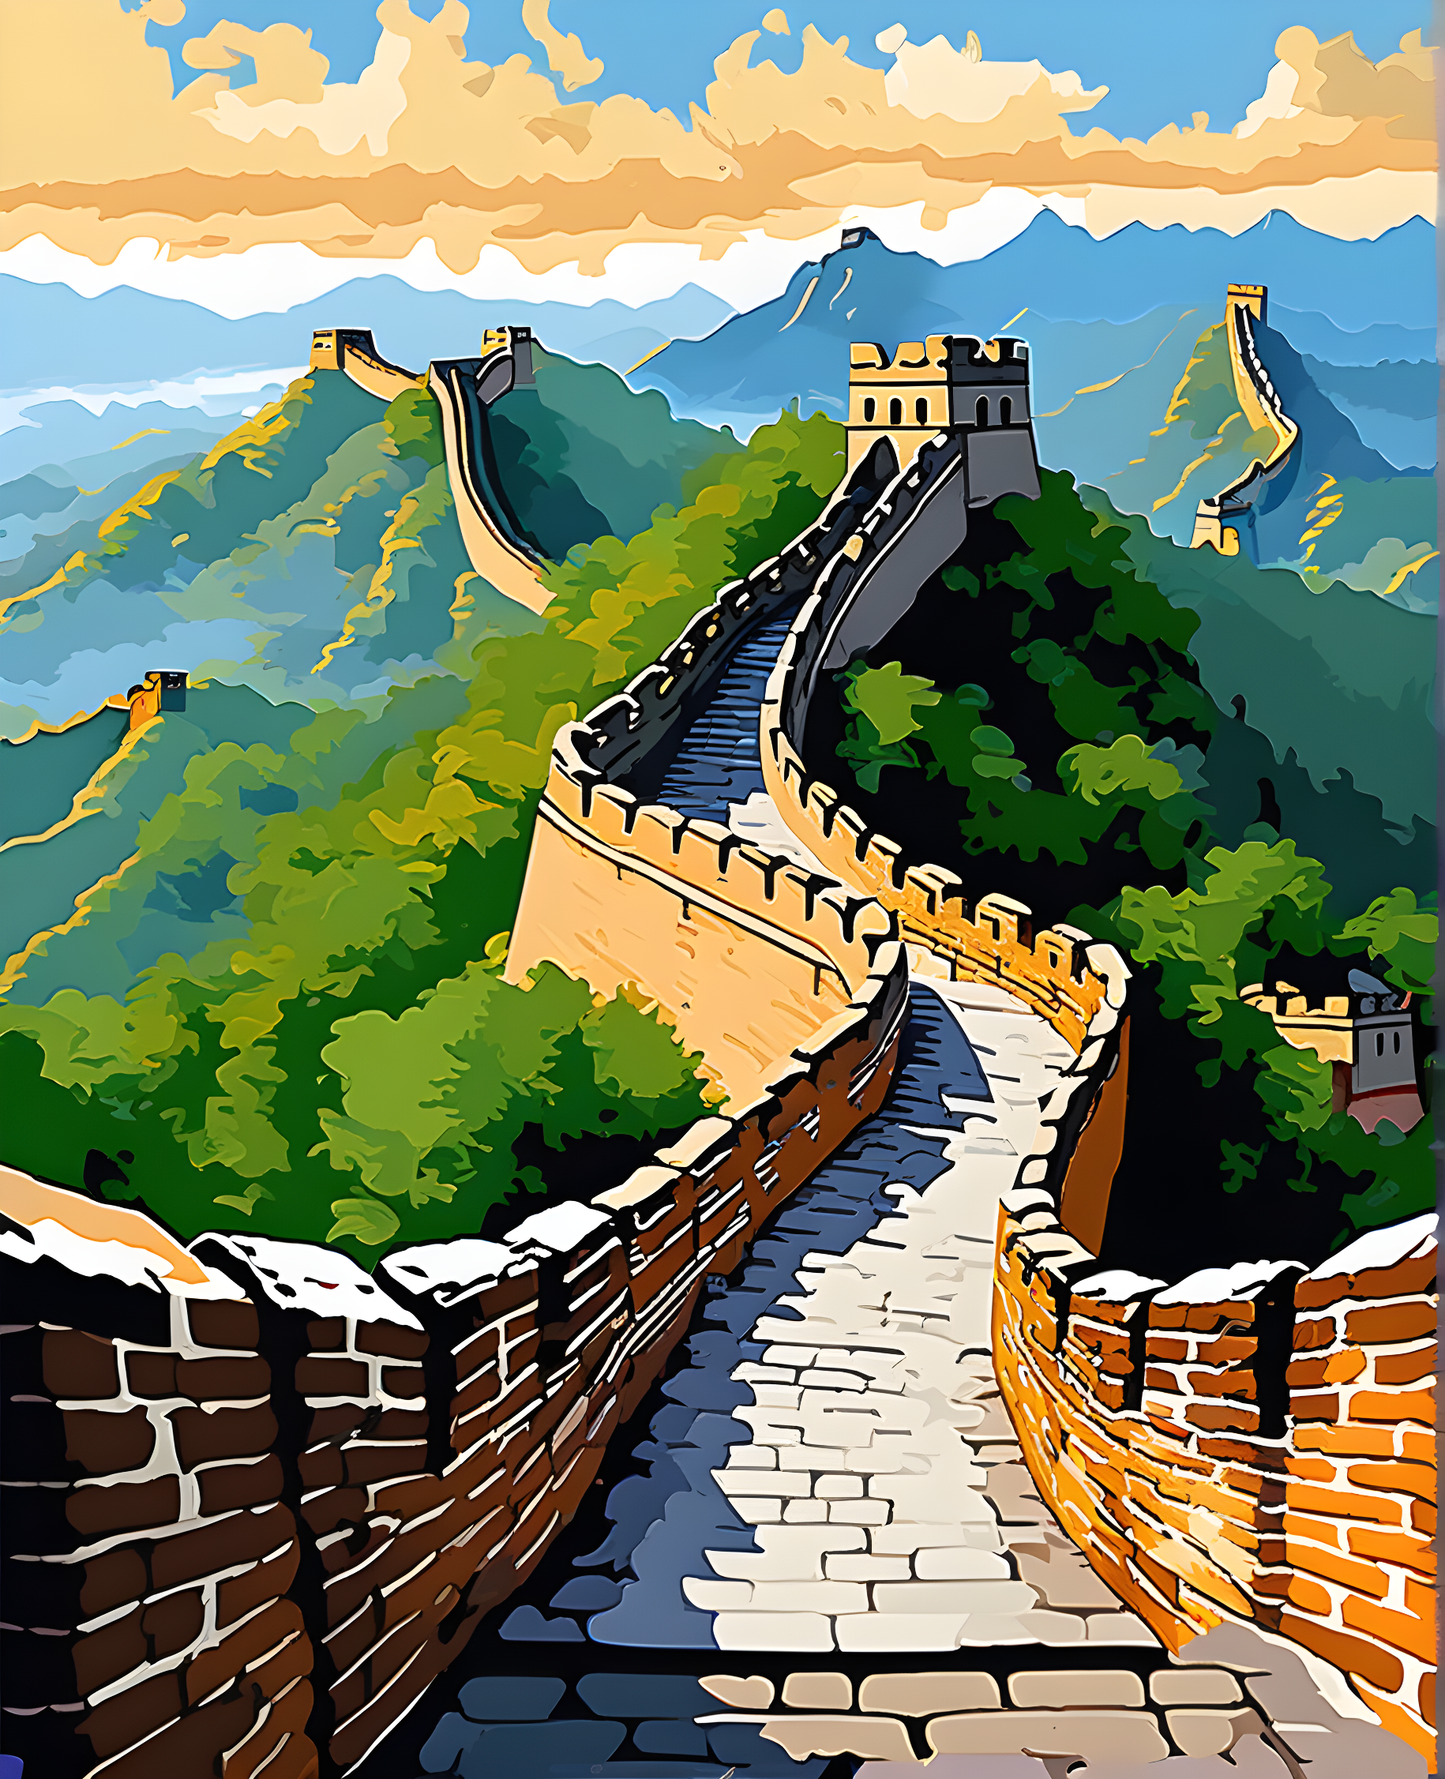 China Collection PD (12) - Great Wall of China - Van-Go Paint-By-Number Kit